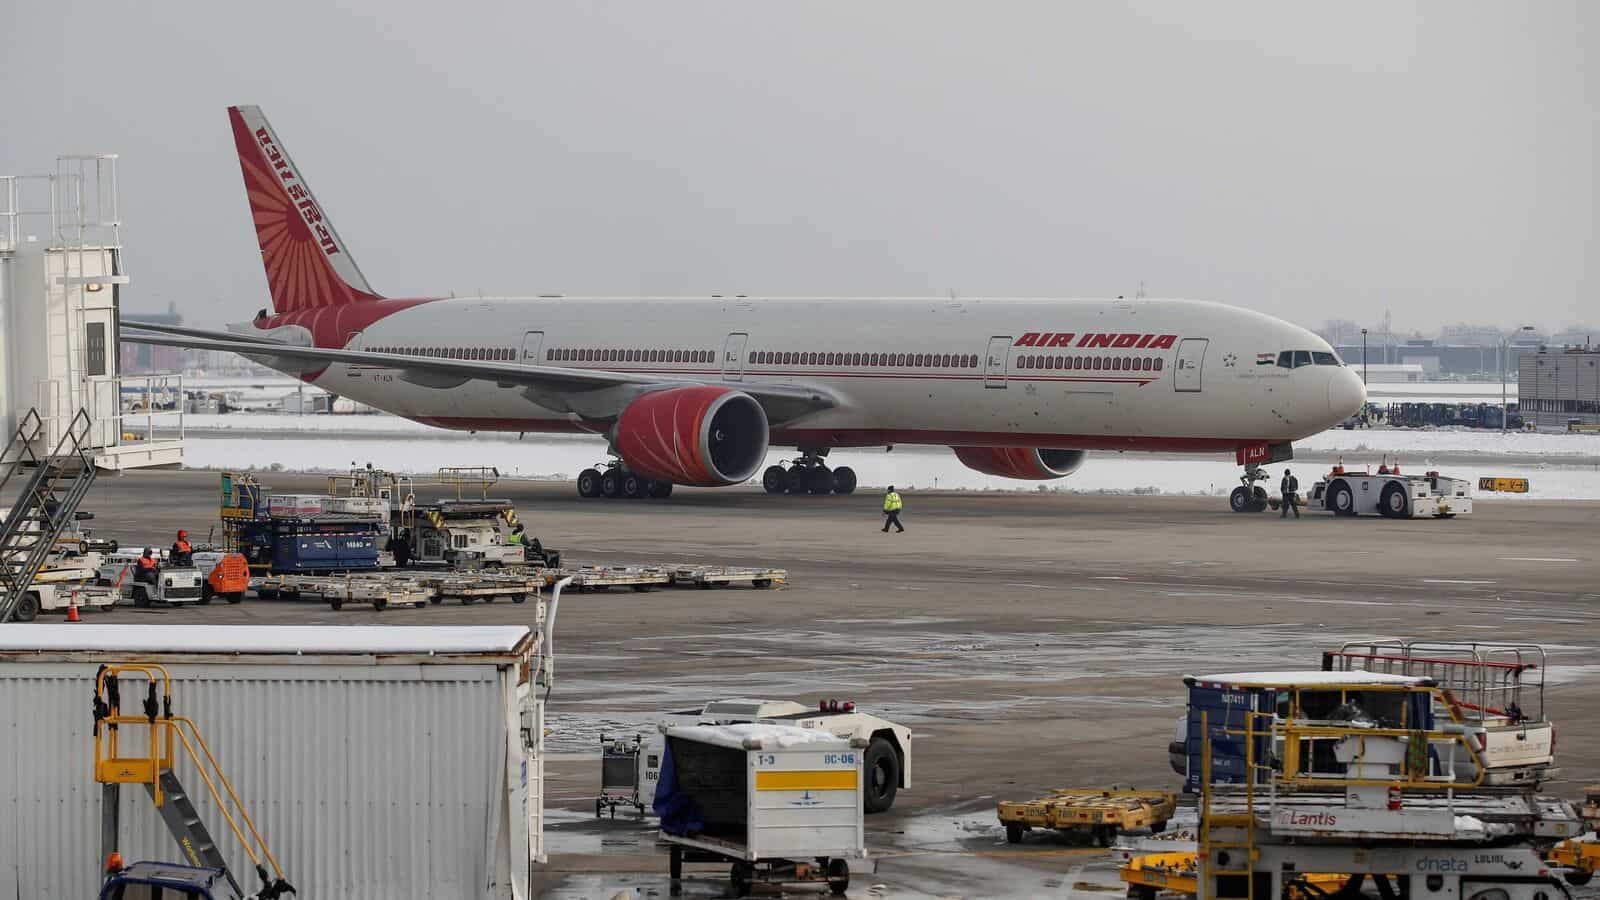 Air India signs big deal of 470 aircraft with Boeing, Airbus; first plane delivery by end of 2023